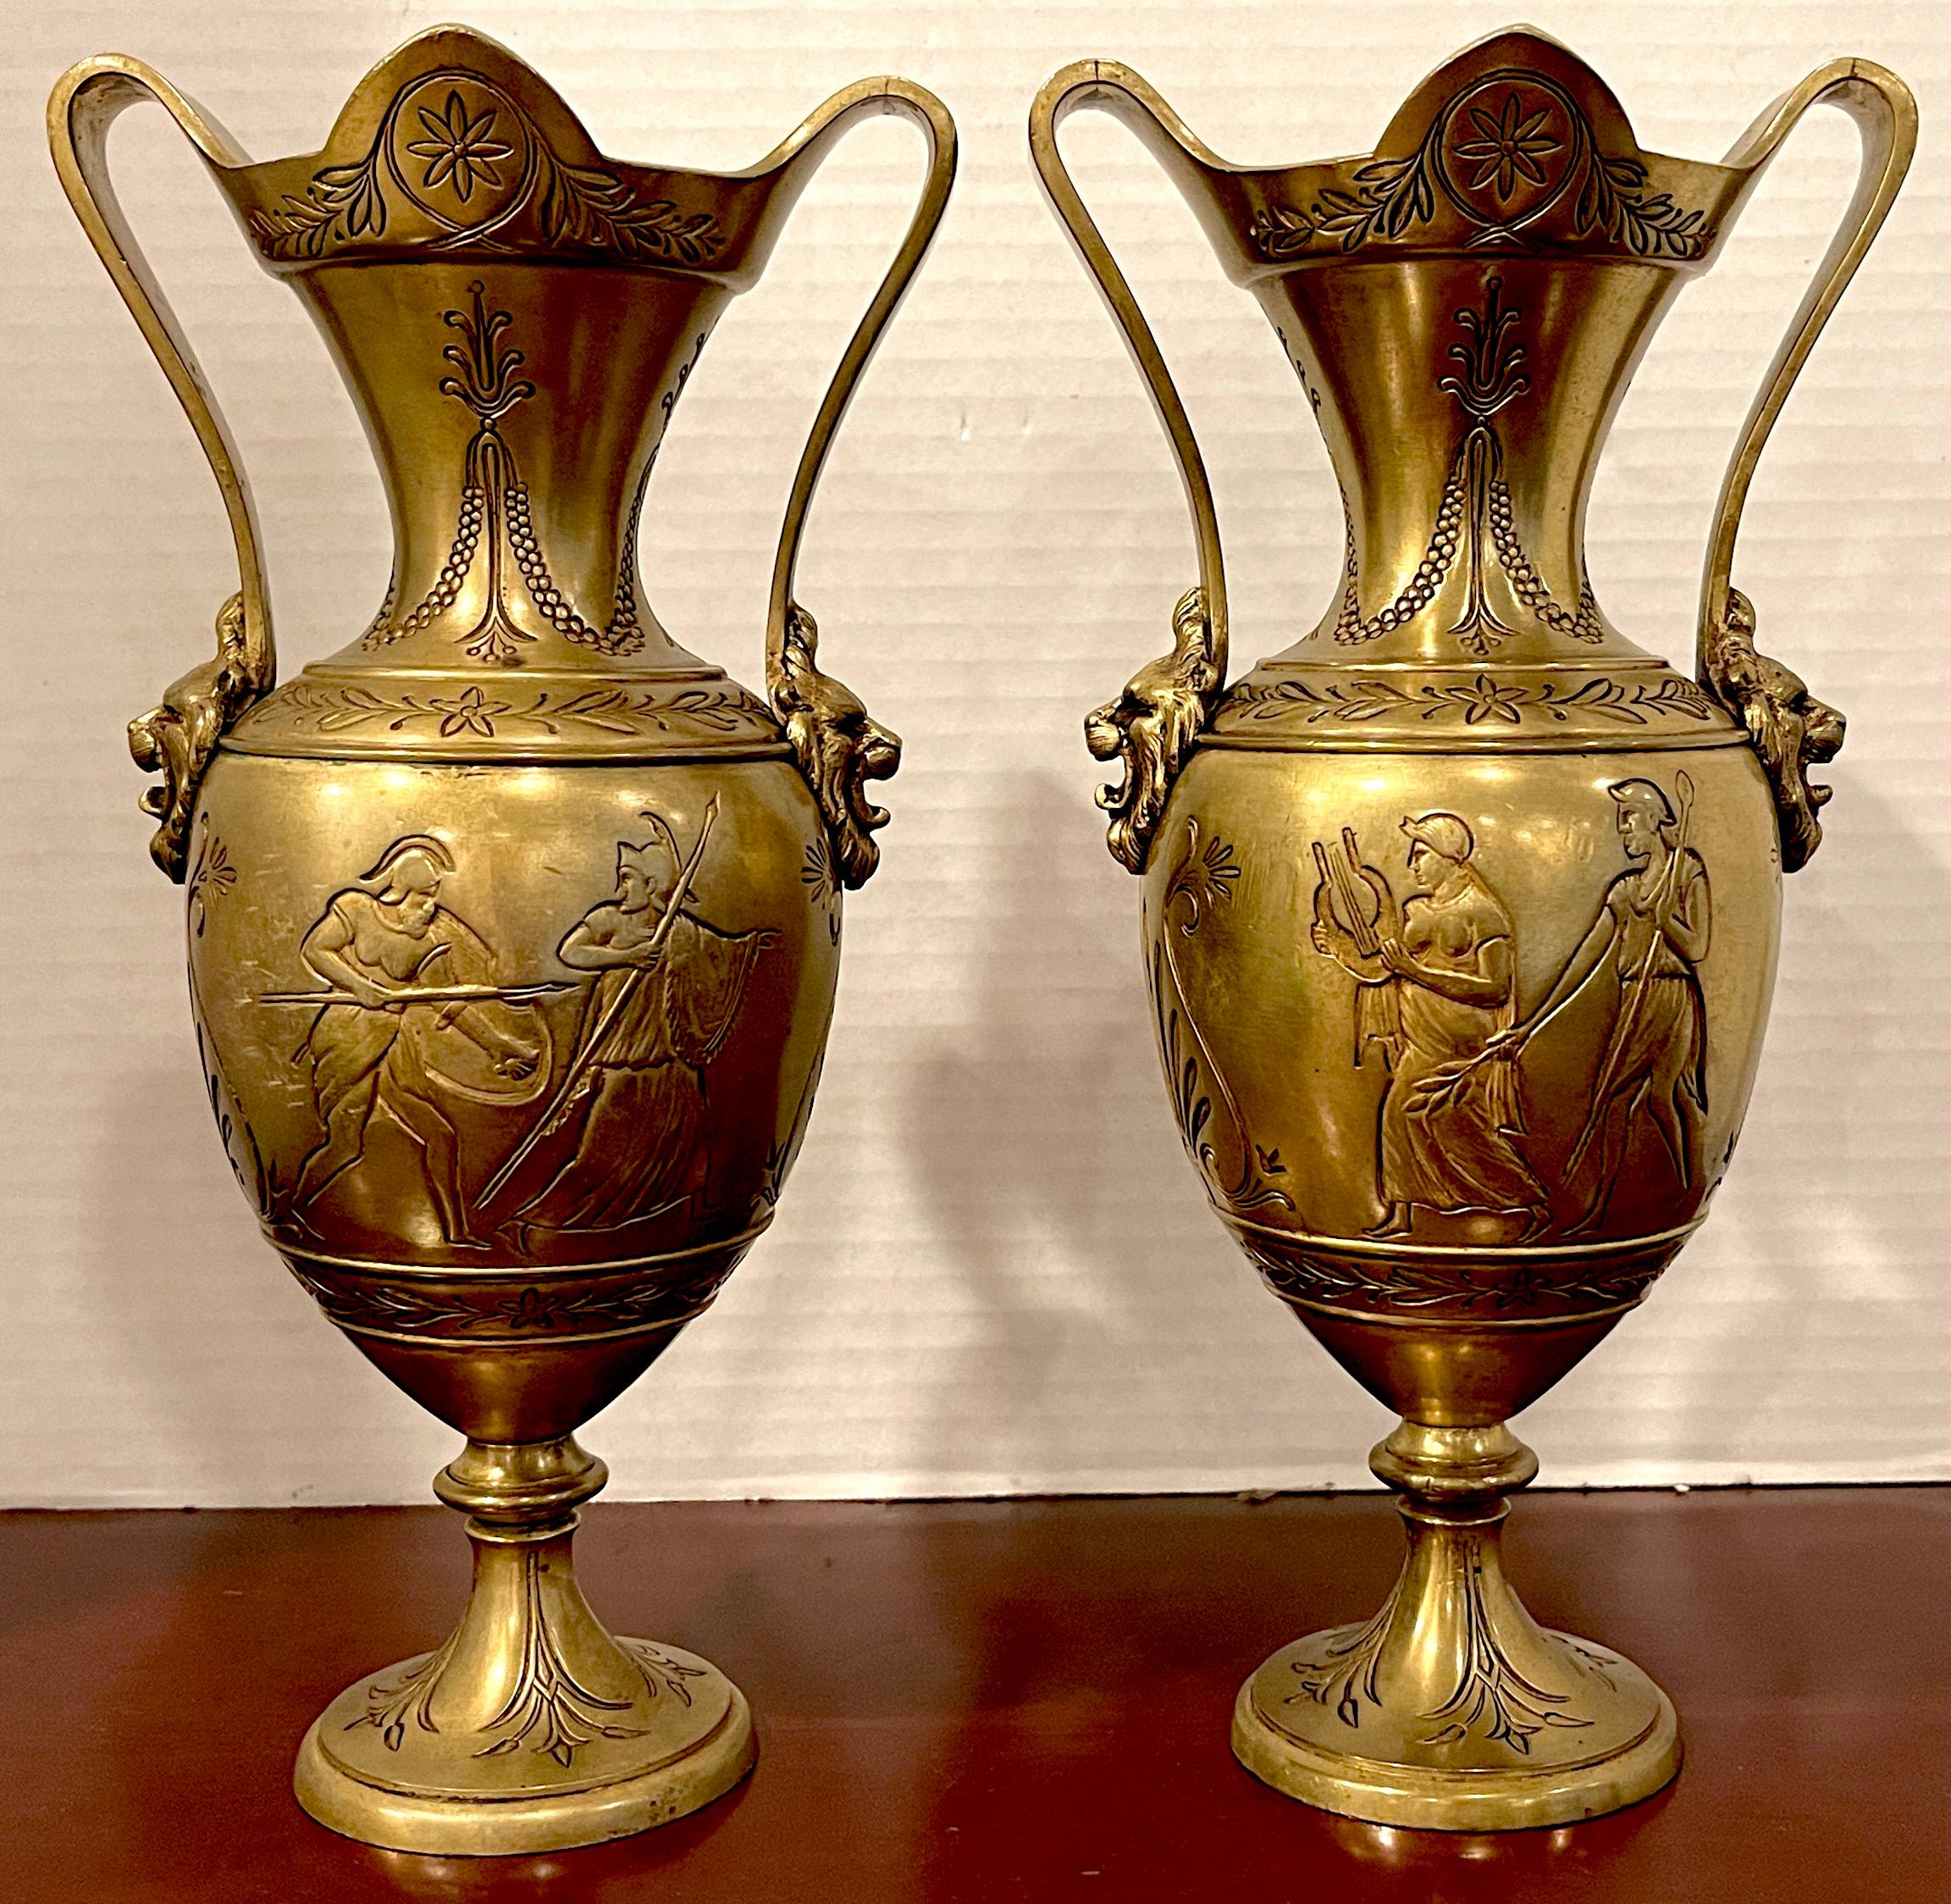 Pair of Grand Tour 'Néo-Grec' gilt bronze vases, Attributed, F. Barbedienne
Each one with typical all over decoration, with applied handles with lion masks. Unmarked.
Each vase stands 11-inches high x 6-inches wide x x 5-inches deep, raised on a